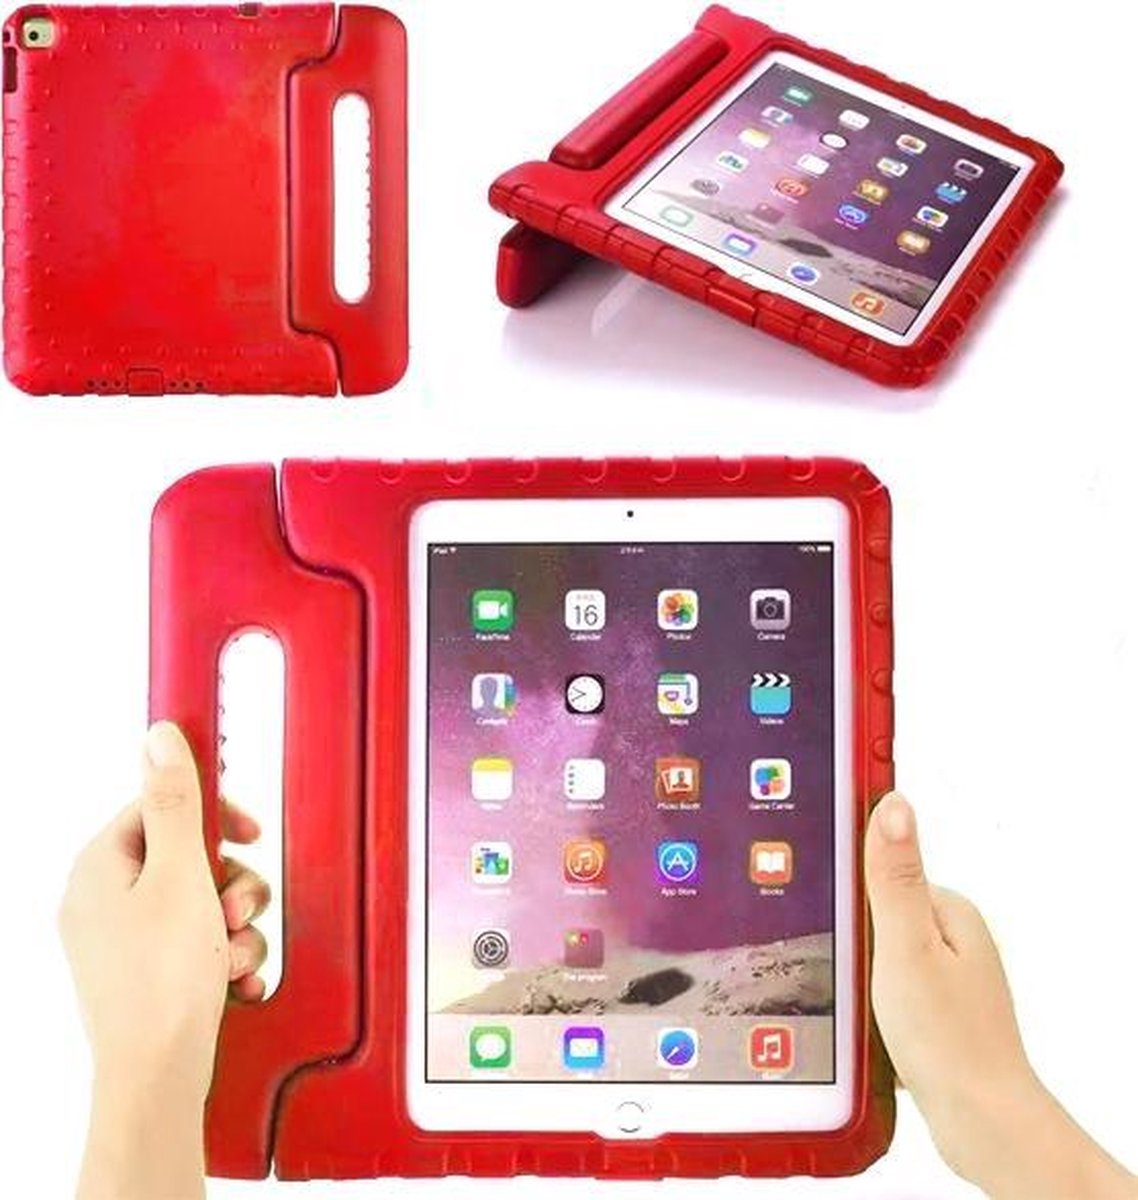 Kids Proof Cover Samsung Galaxy Tab 4 7.0 T230 hoes voor kinderen Rood